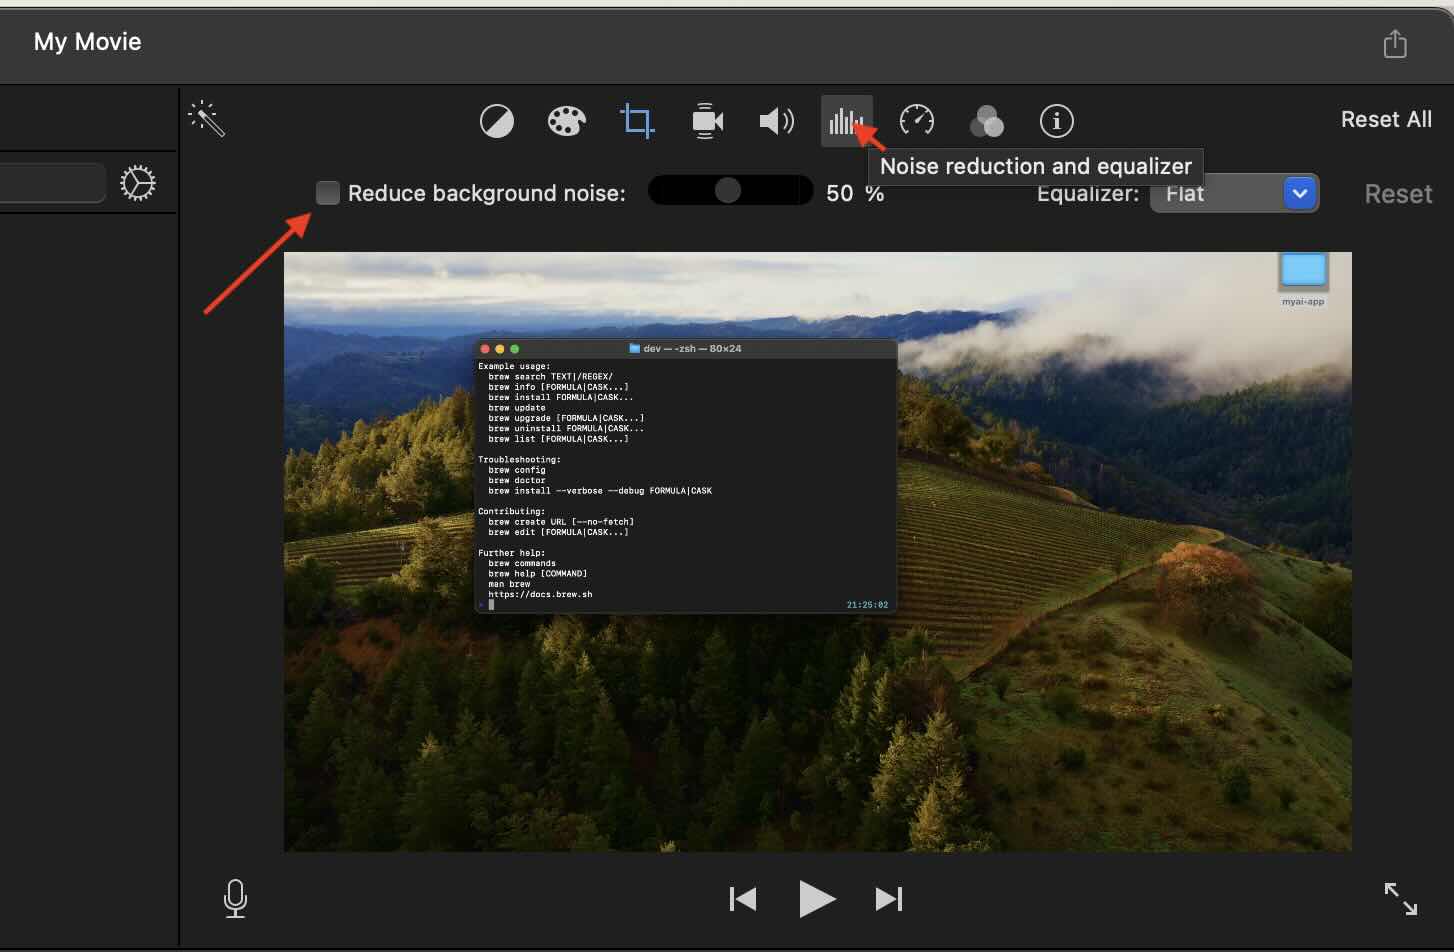 iMovies Noise reduction tool